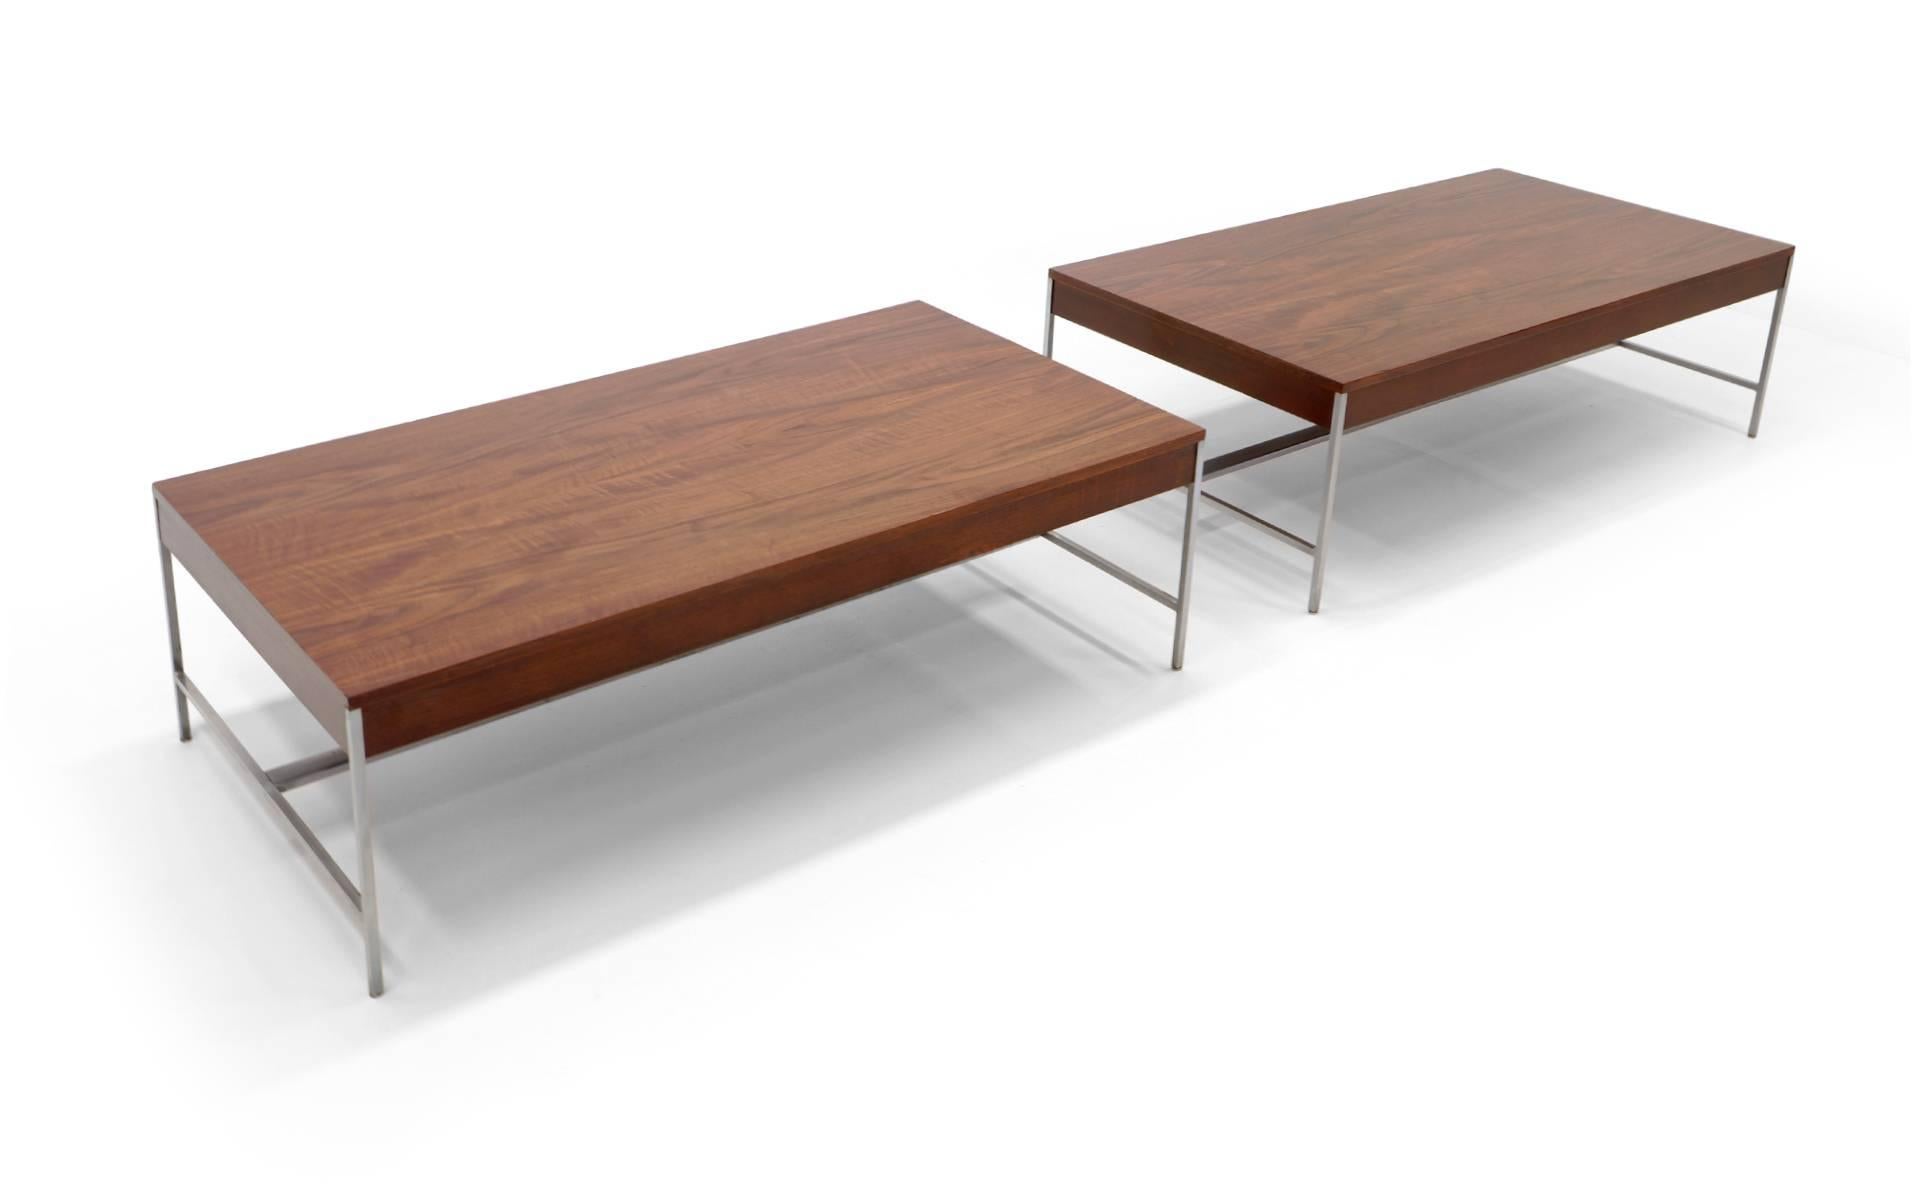 George Nelson for Herman Miller coffee tables. These were originally purchases in the 1950s as a matched pair. Price is for each. Buy one or two. Beautifully figured walnut with brushed steel frames. The first three images are of both tables. Images